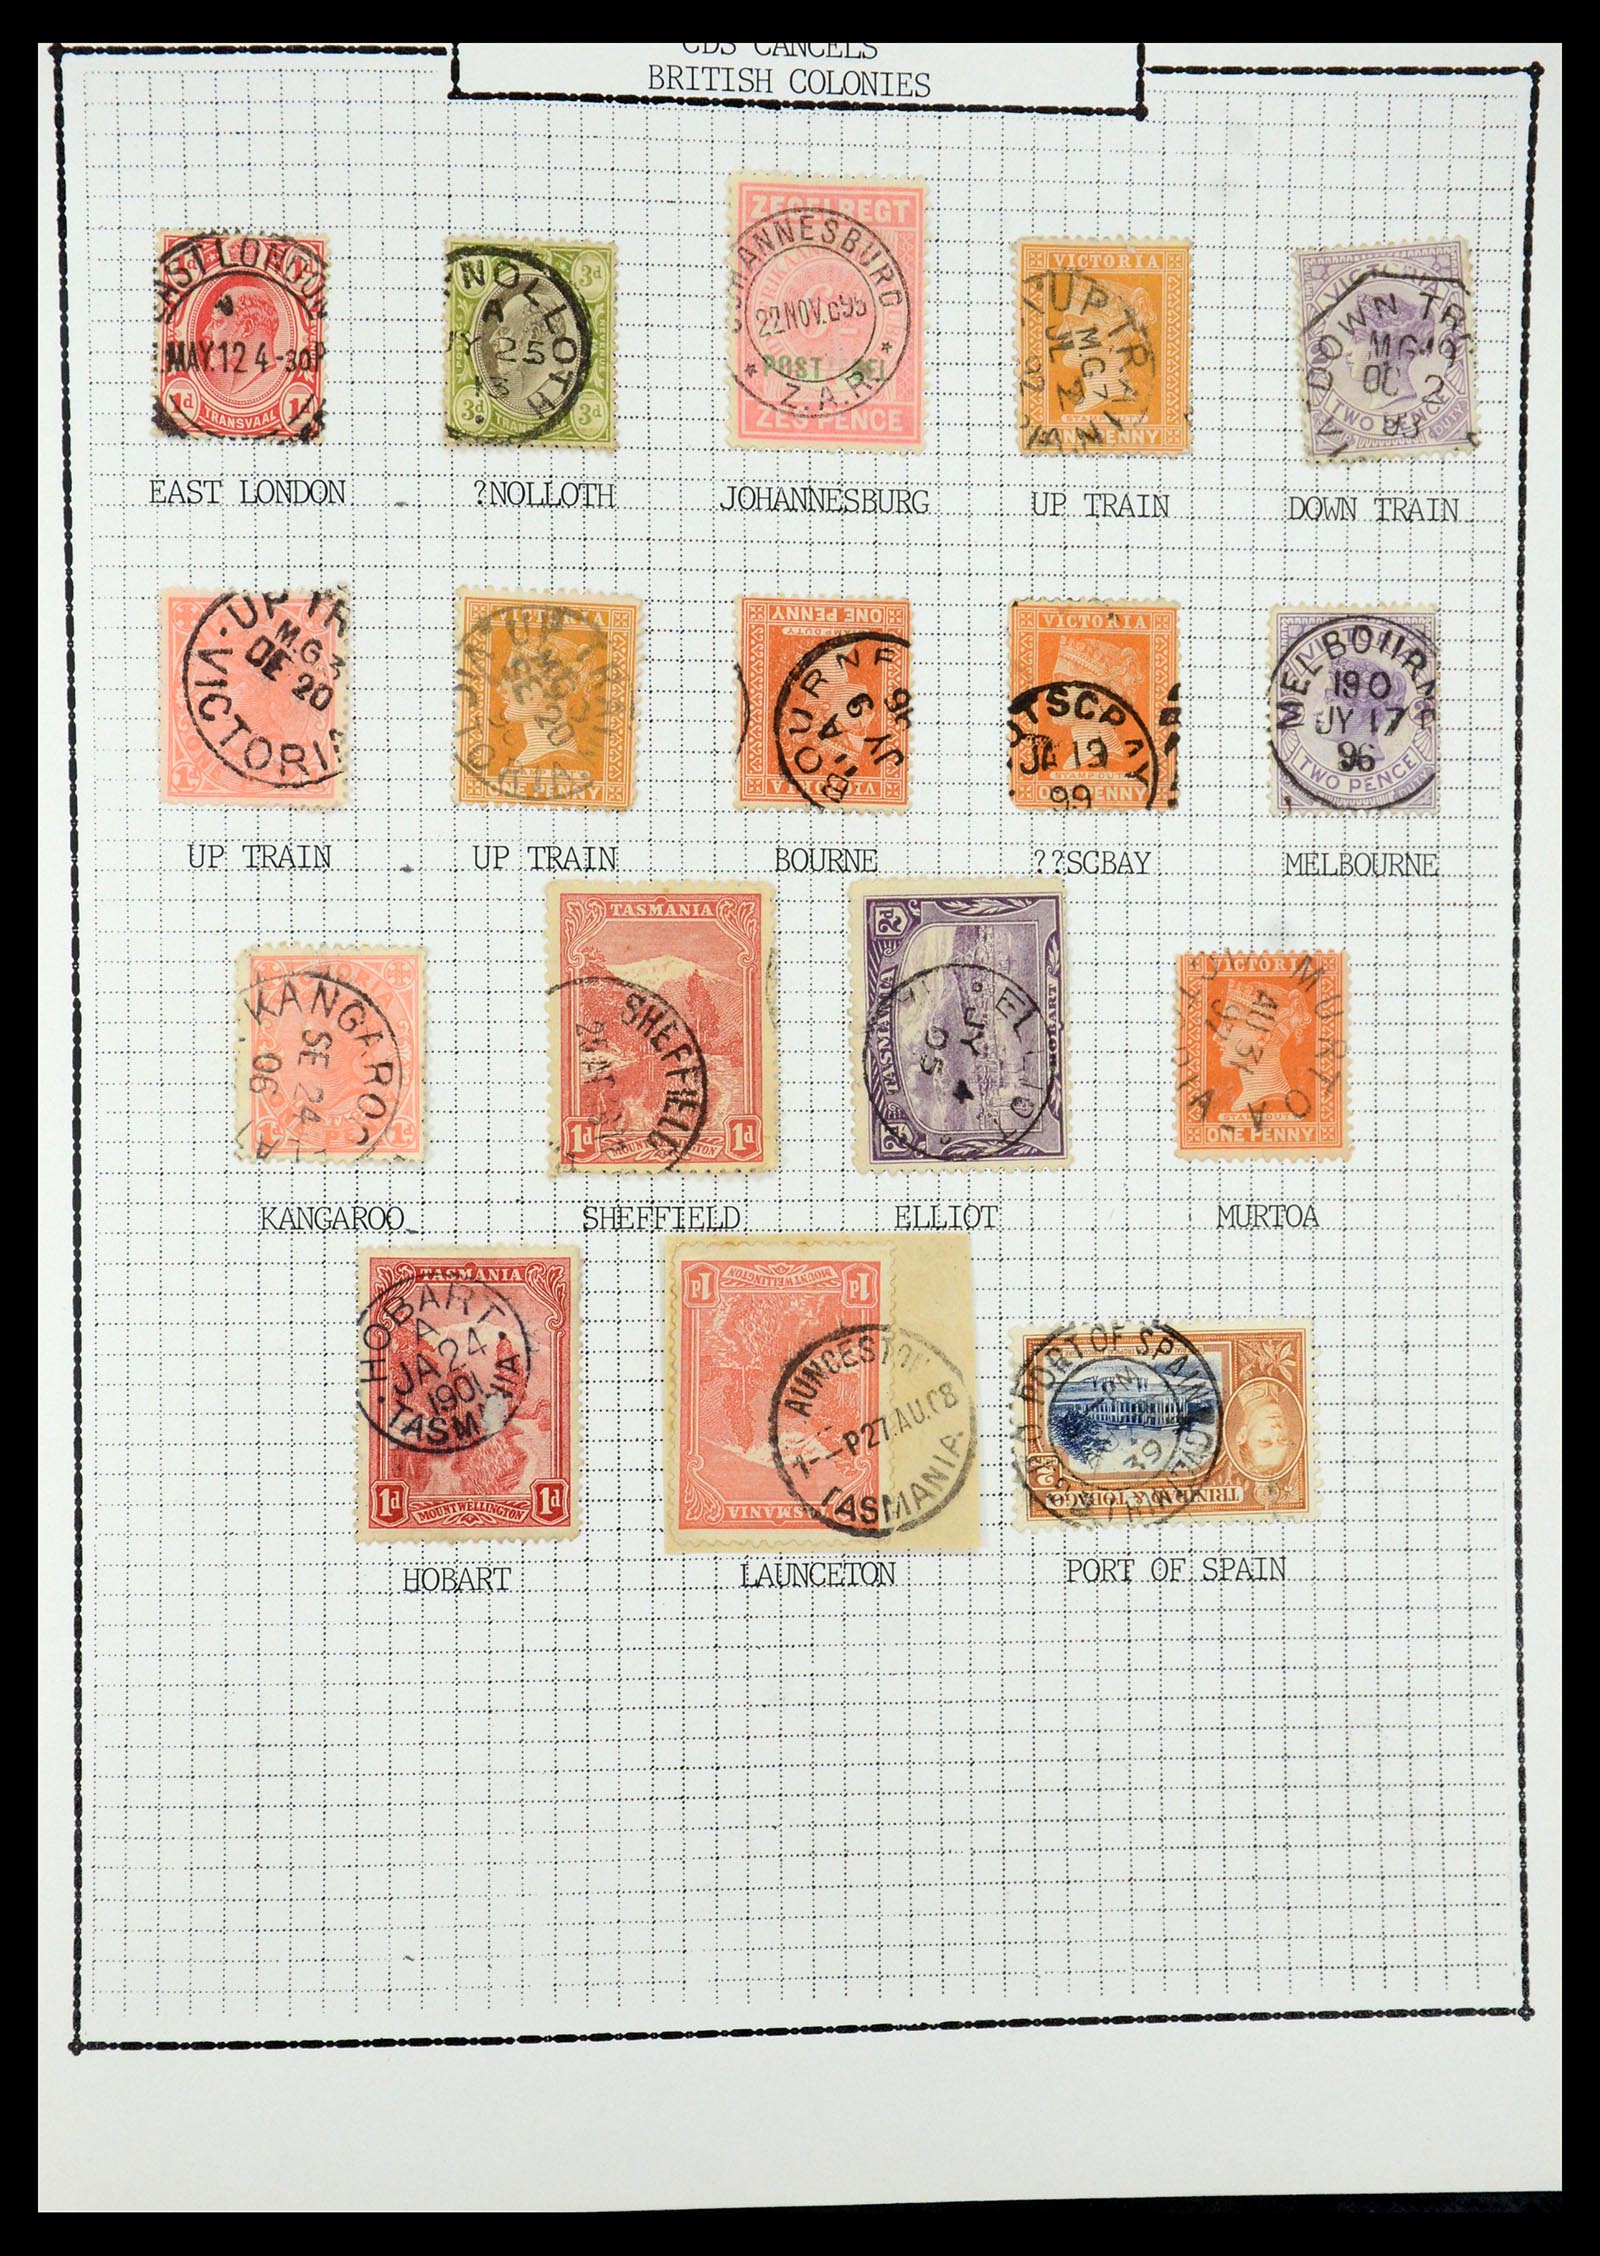 35507 038 - Stamp Collection 35507 Australian States cancels 1859-1899.